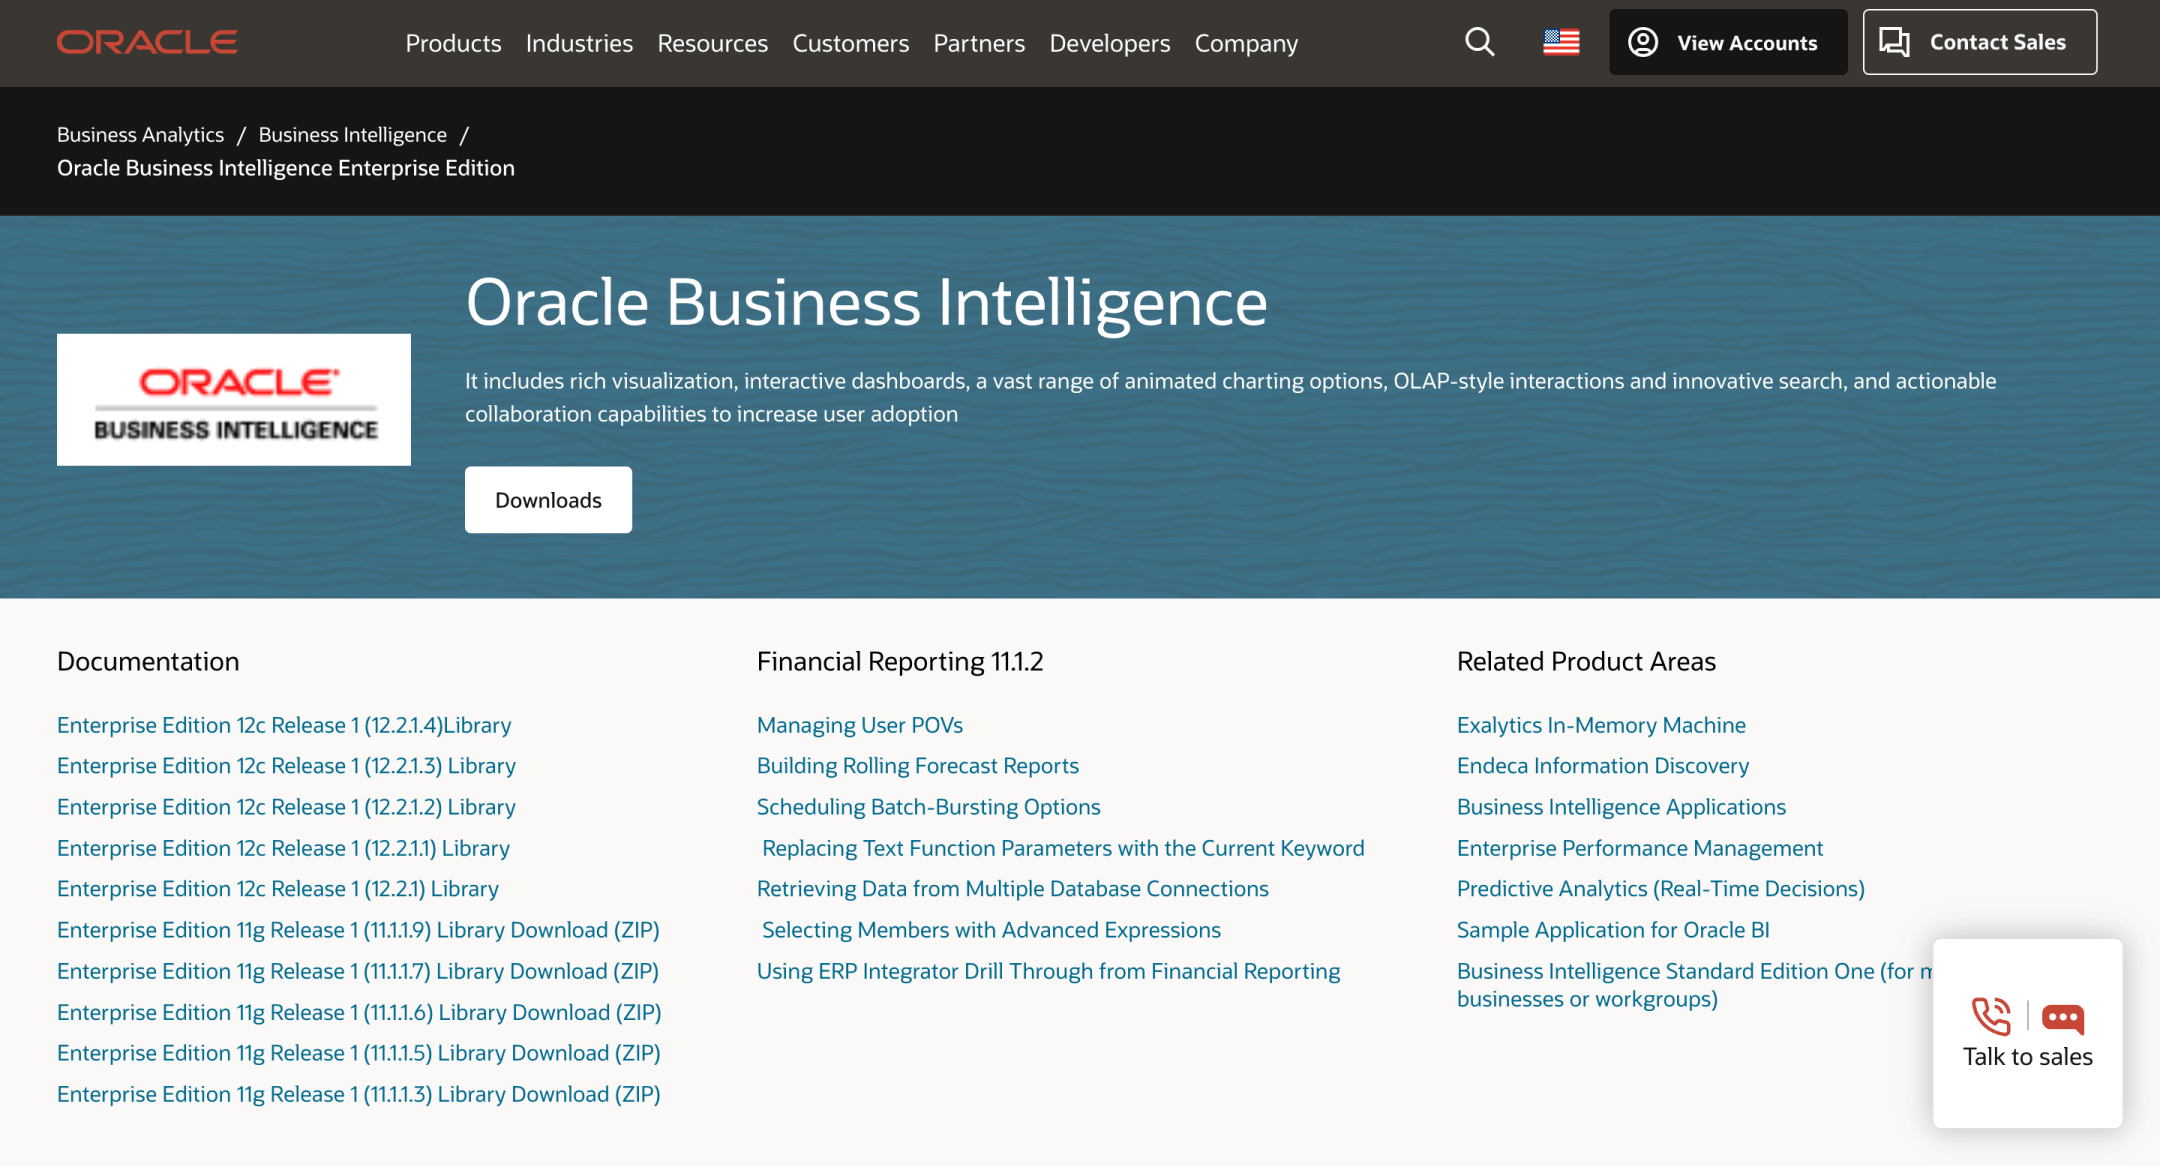 The screenshot demonstrates the interface of Oracle Business Intelligence solution